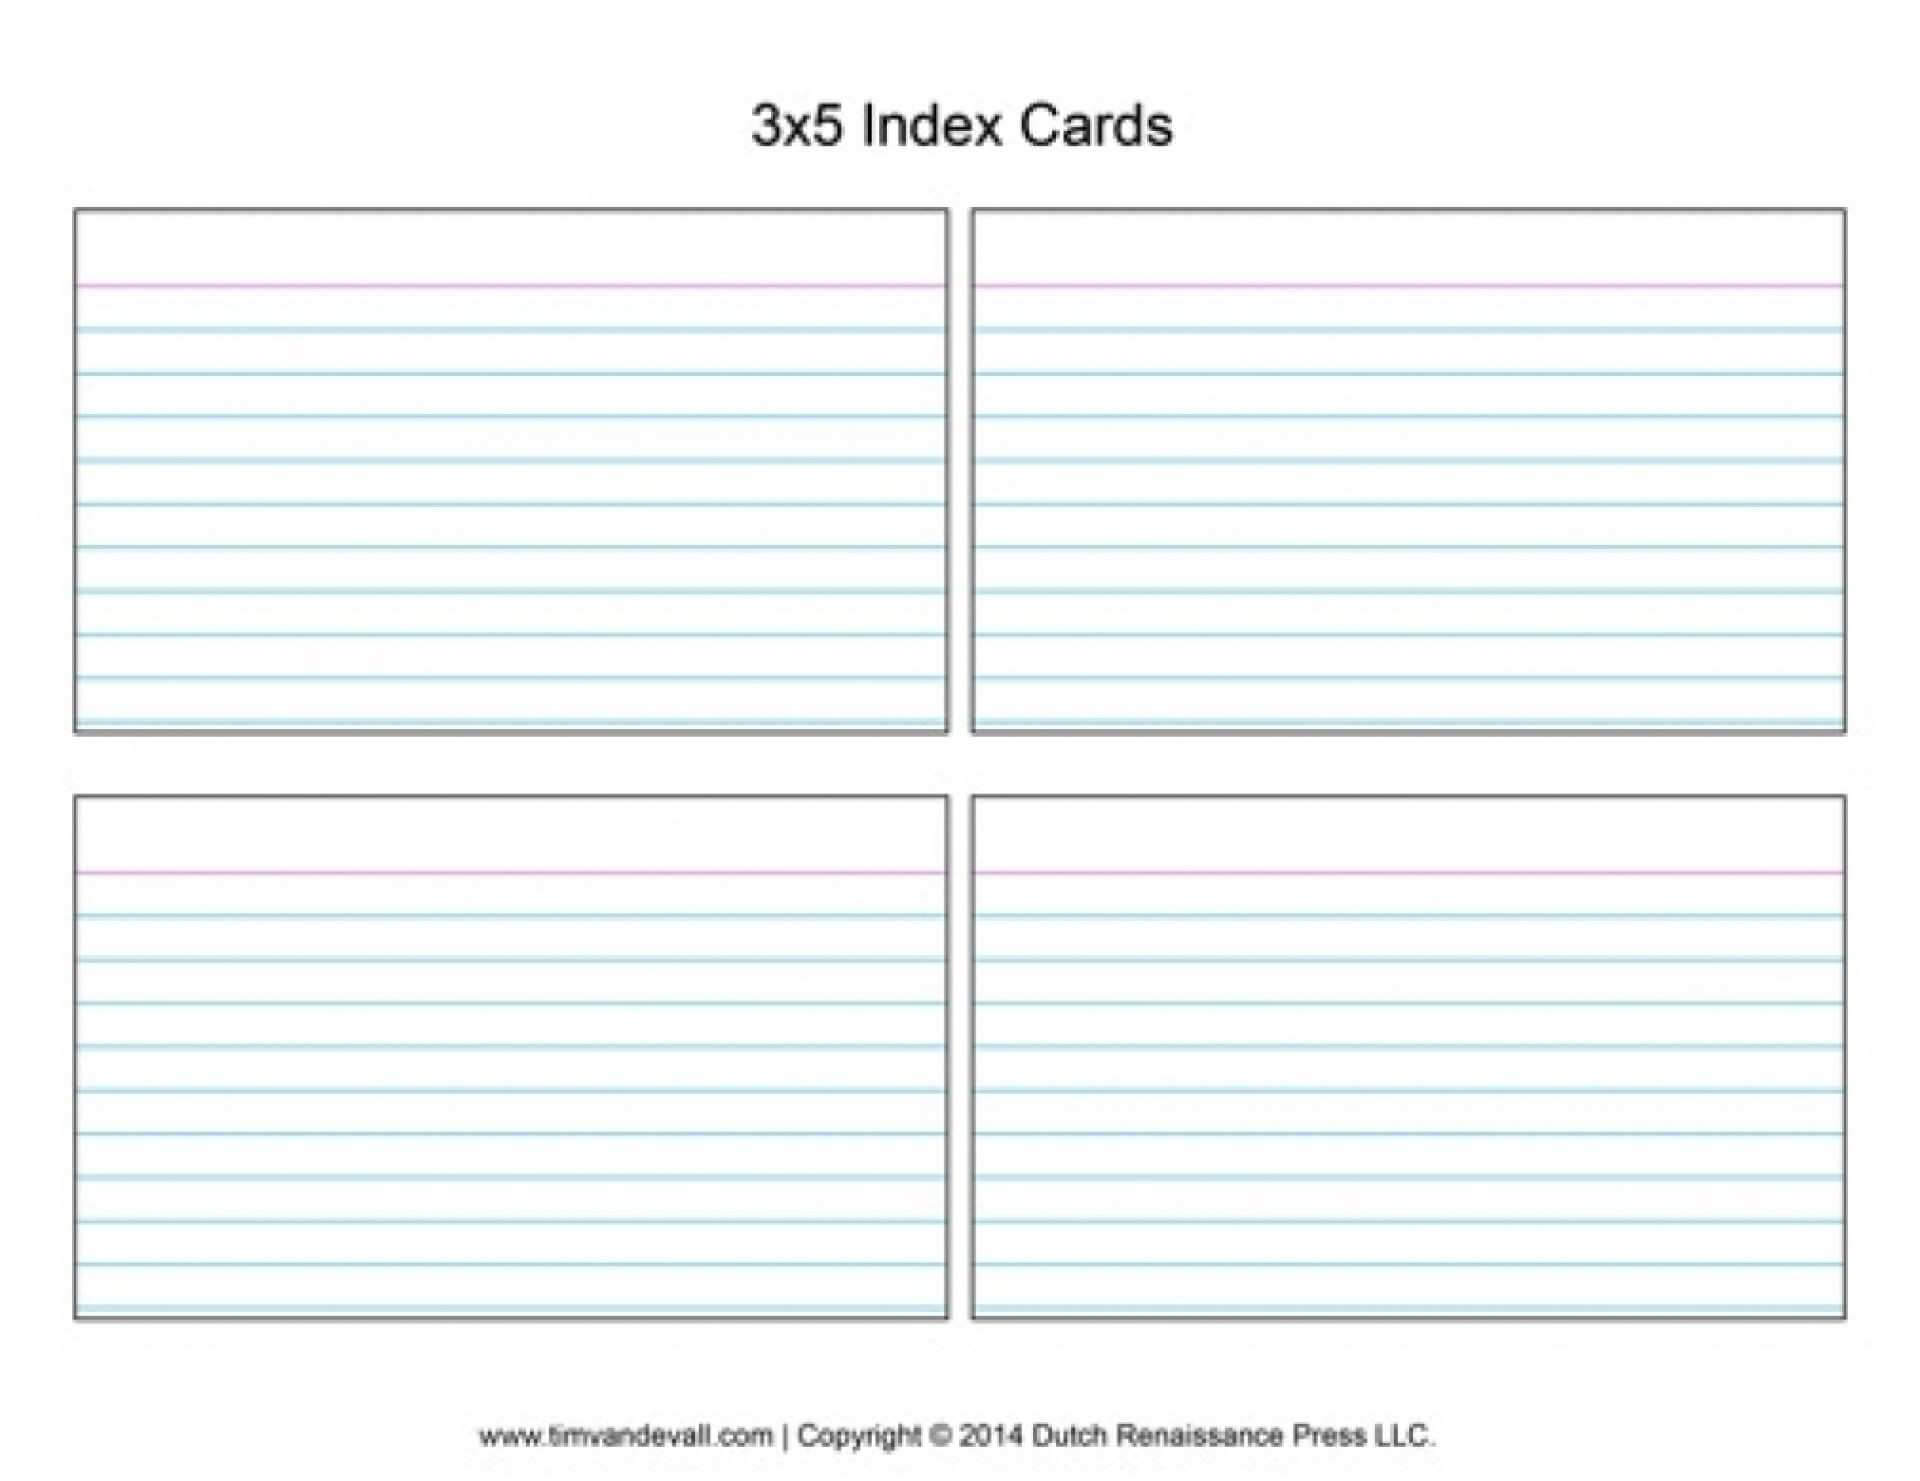 001 Free Index Card Template Printable Flash Cards 2X2 Intended For 3 By 5 Index Card Template